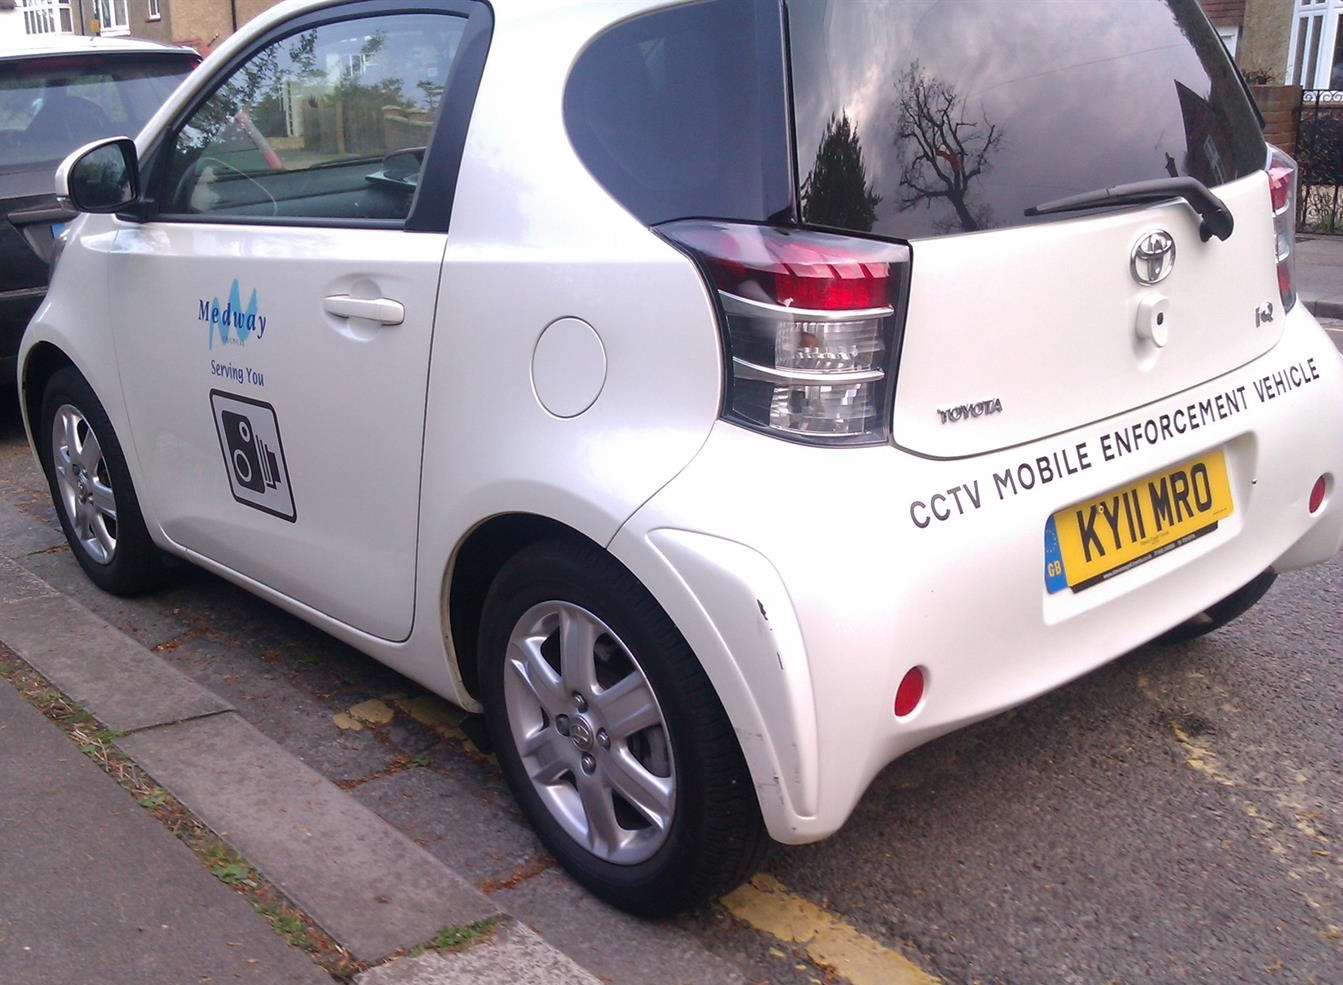 The Medway Council CCTV car